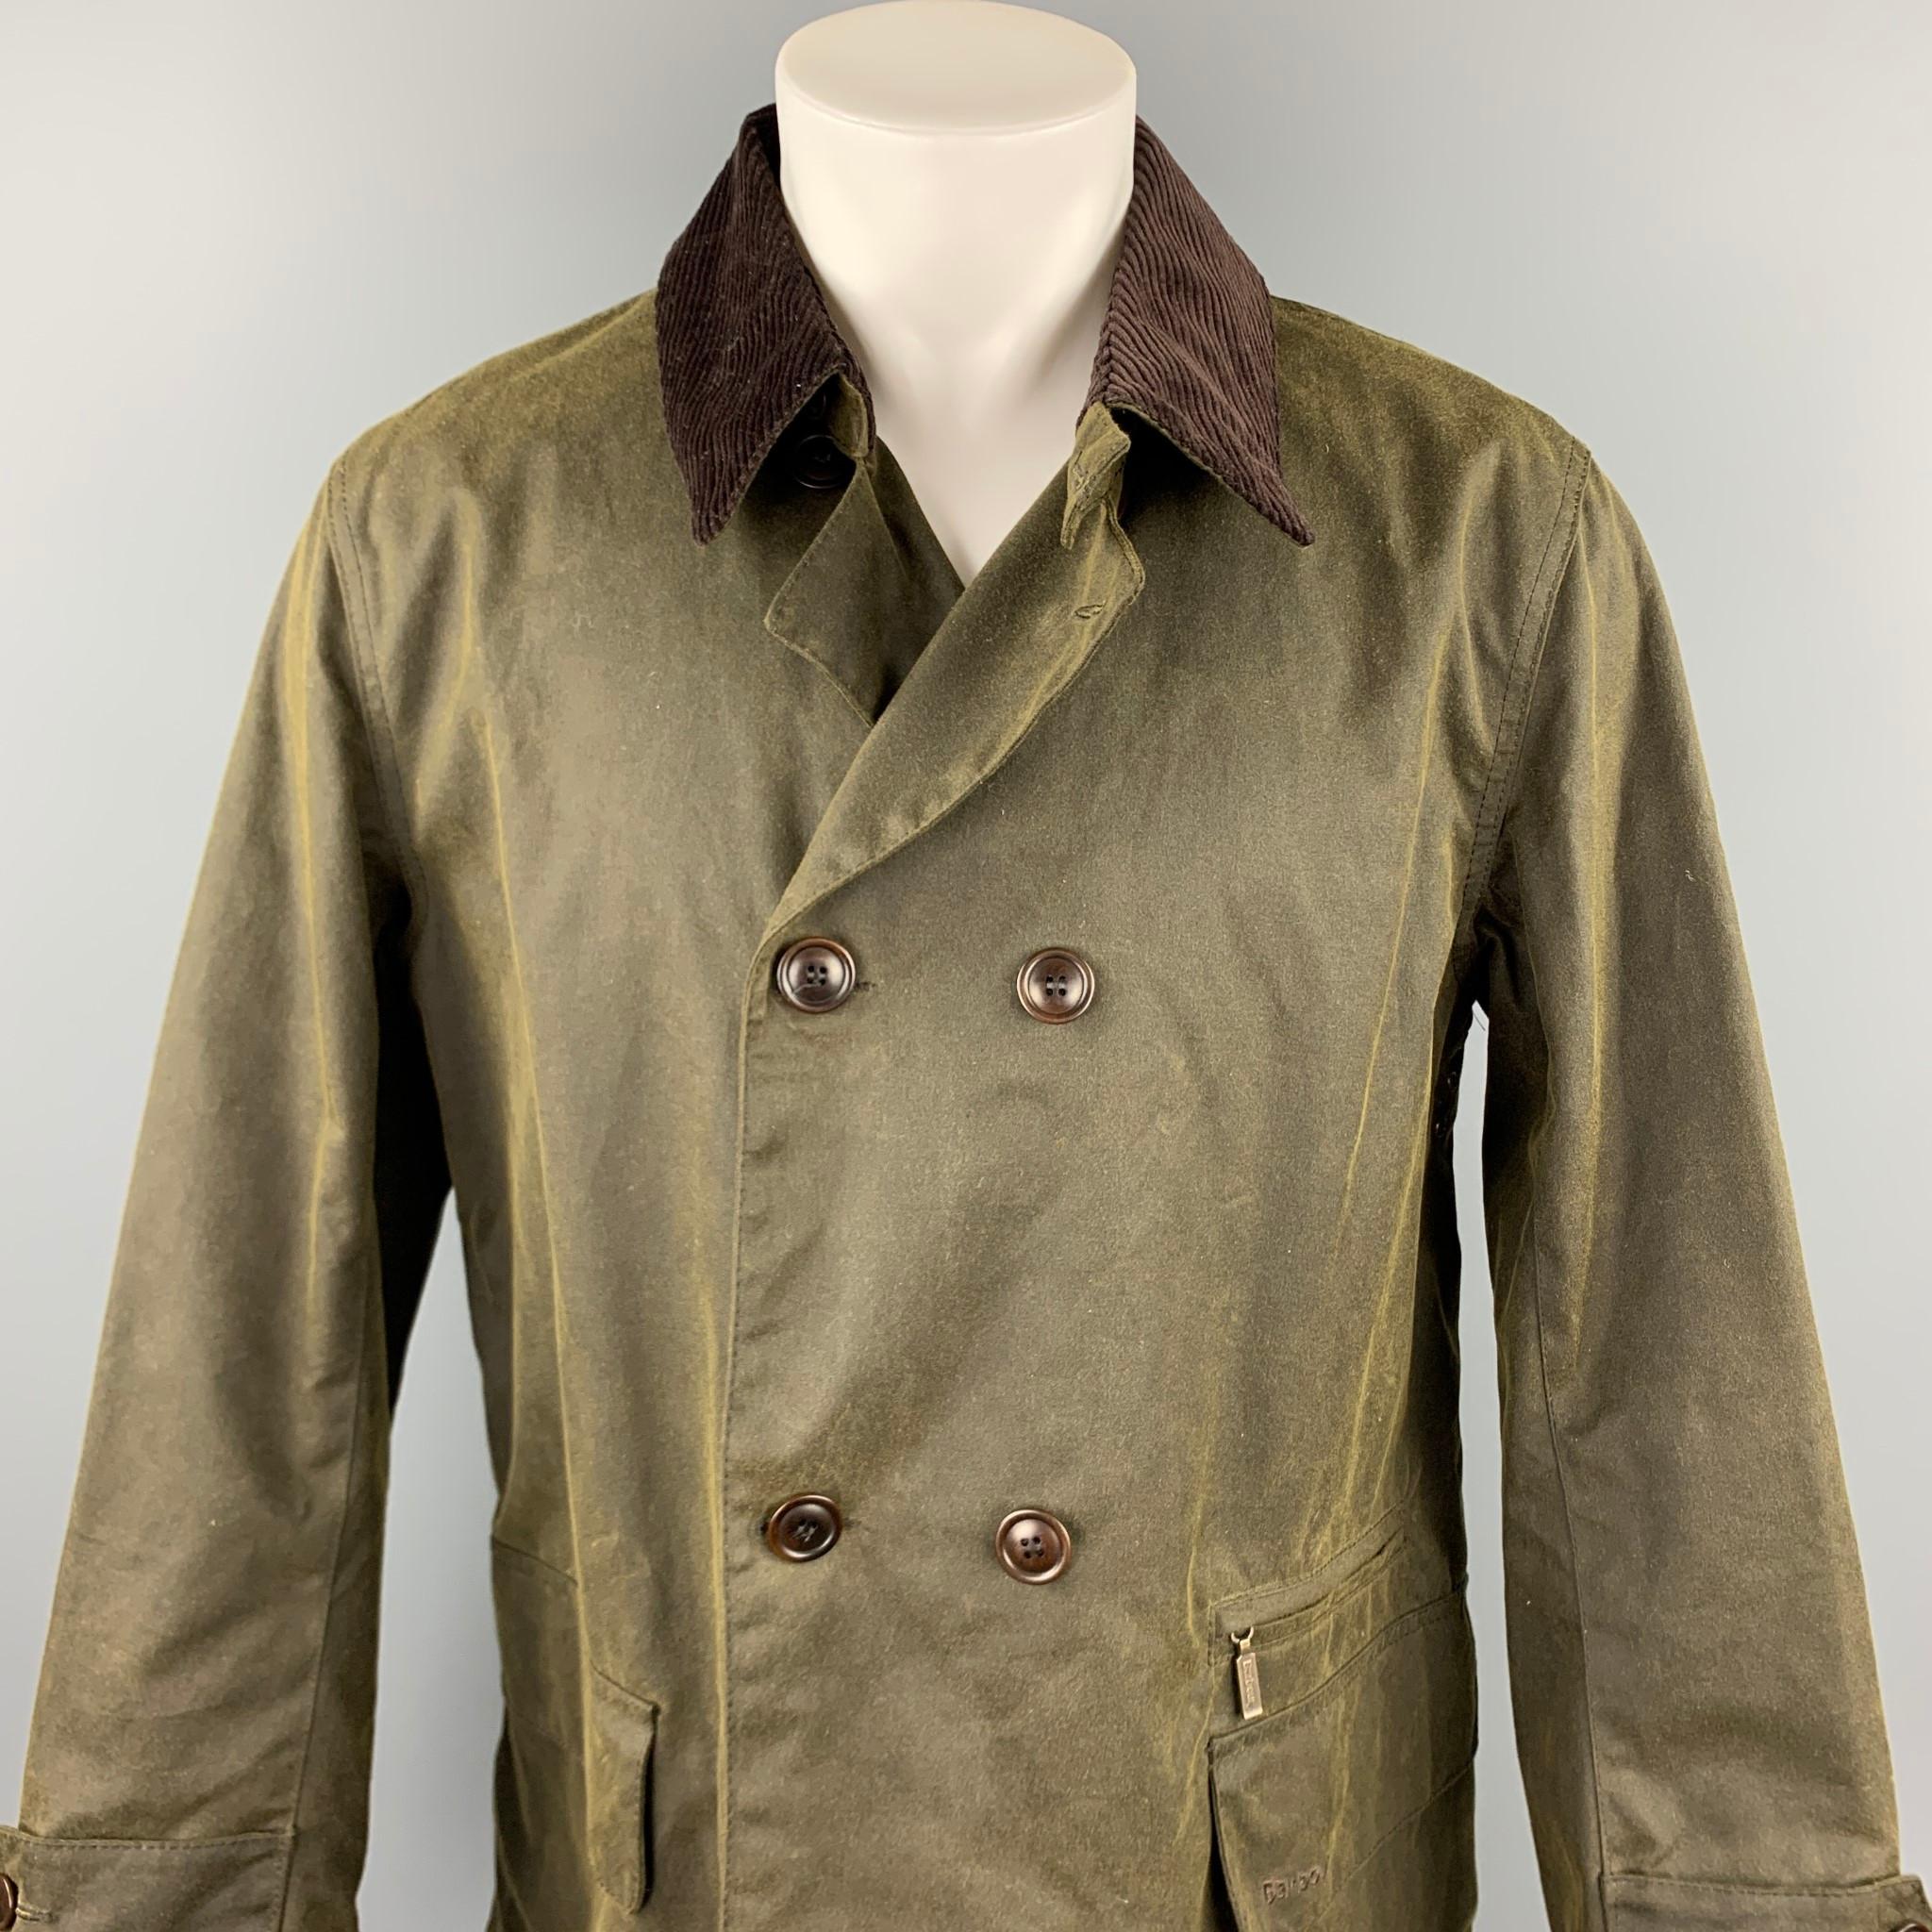 BARBOUR coat comes in a olive waxed cotton with a plaid liner featuring a corduroy collar, flap pockets, buttoned sleeves, and a double breasted closure. 

New With Tags. 
Marked: M

Measurements:

Shoulder: 19 in. 
Chest: 46 in. 
Sleeve: 25.5 in.